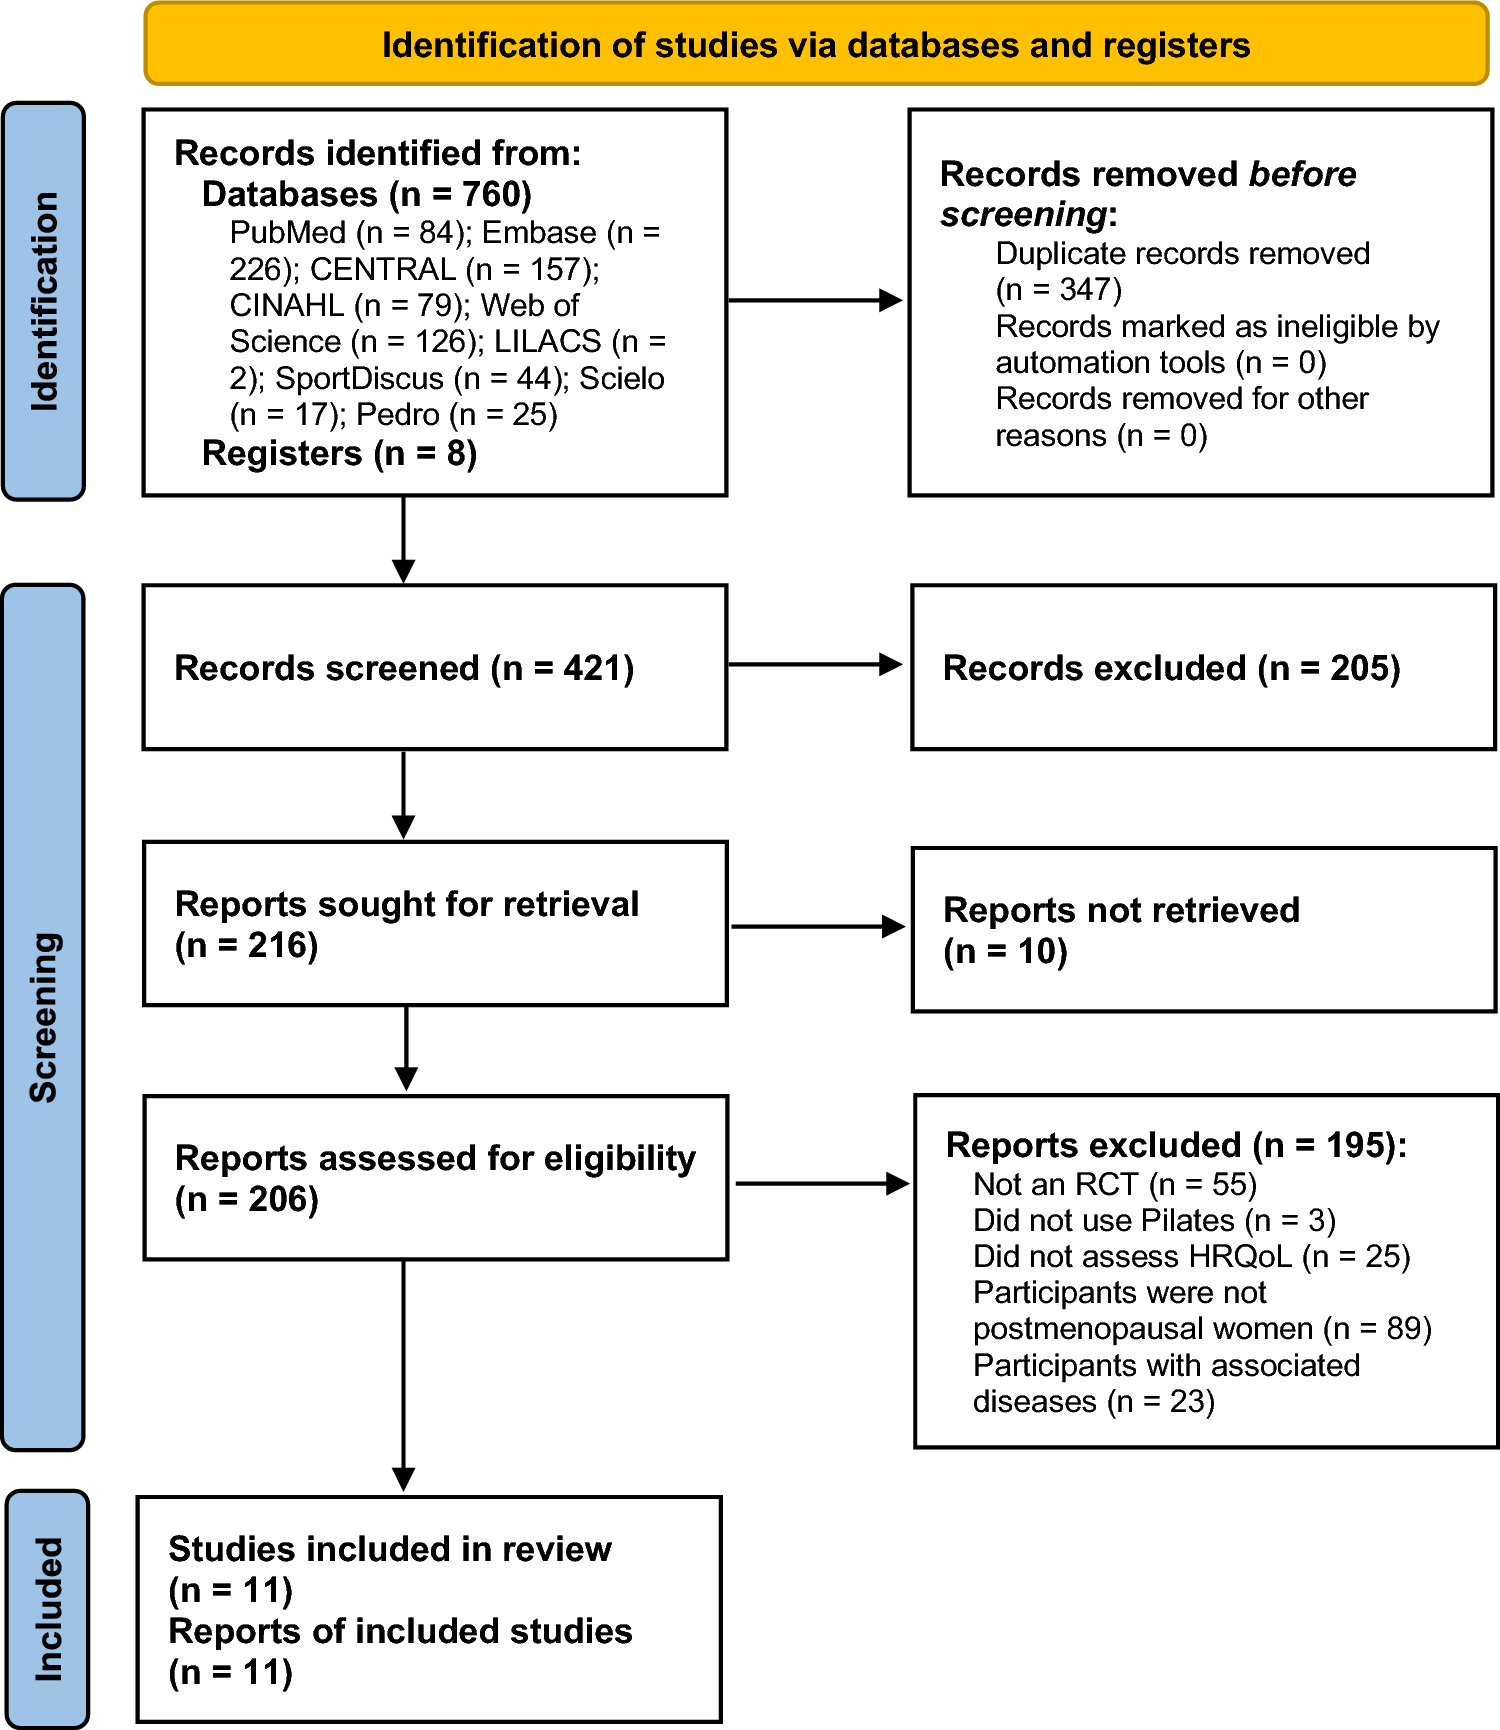 Effects of Pilates exercises on health-related quality of life in postmenopausal women: a systematic review and meta-analysis